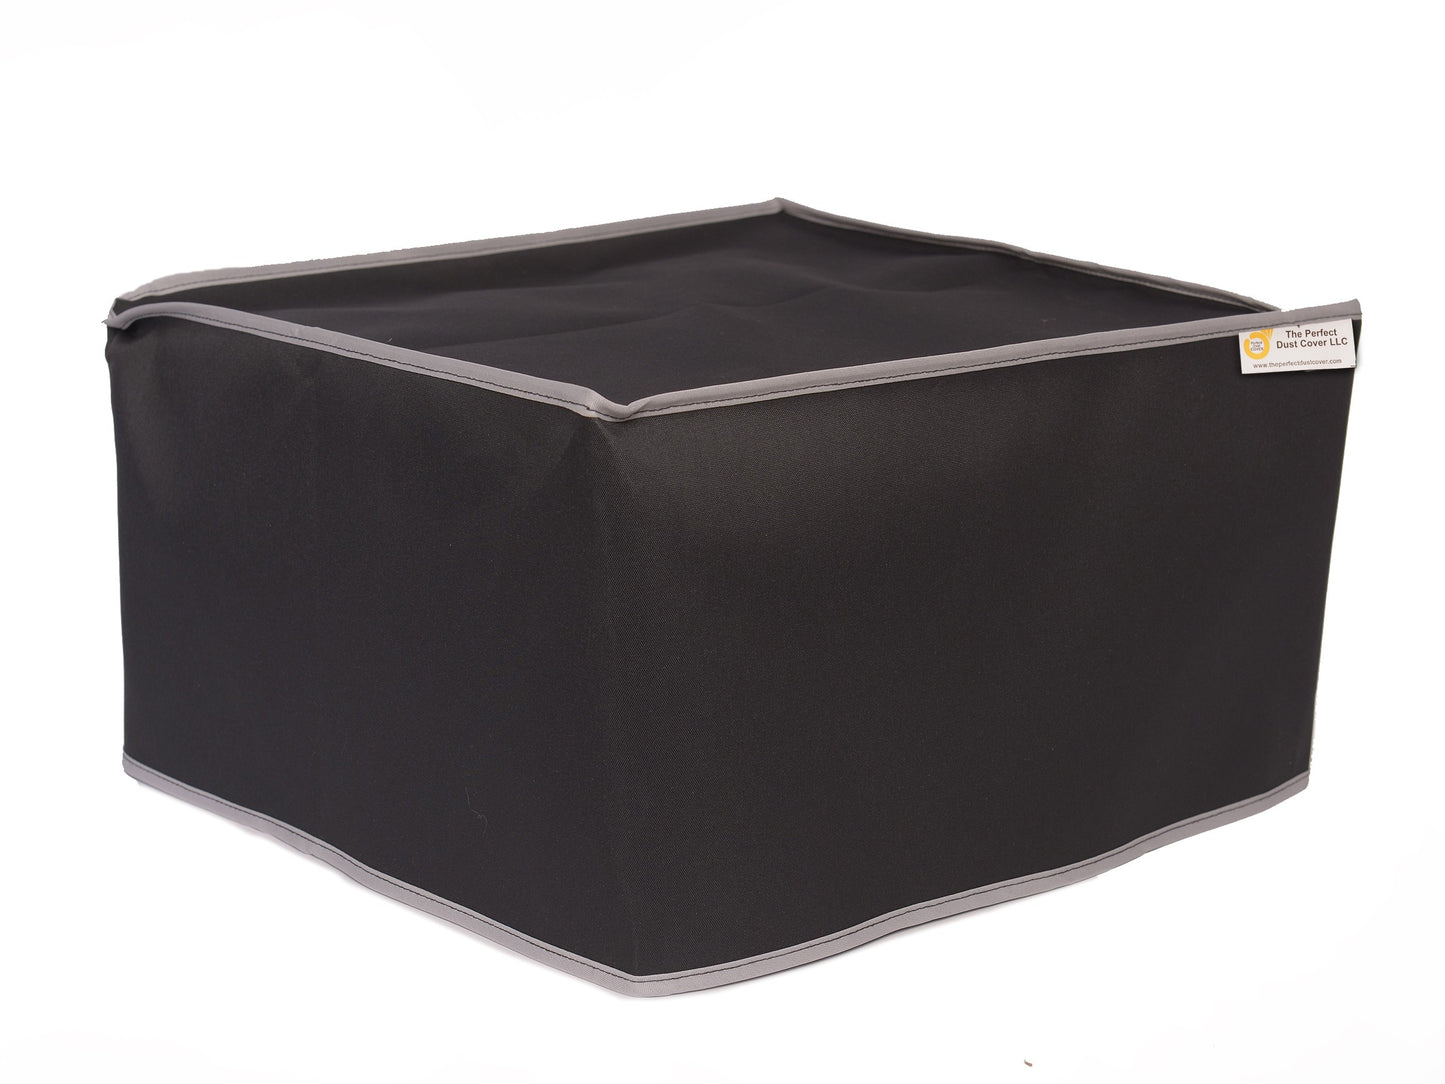 The Perfect Dust Cover, Black Nylon Cover Compatible with Formlabs Form 4B 3D Laser Printer, Anti-Static, Double Stitched and Waterproof Dust Cover Dimensions 15.7''W x 14.5''D x 21.9''H by Perfect Dust Cover LLC